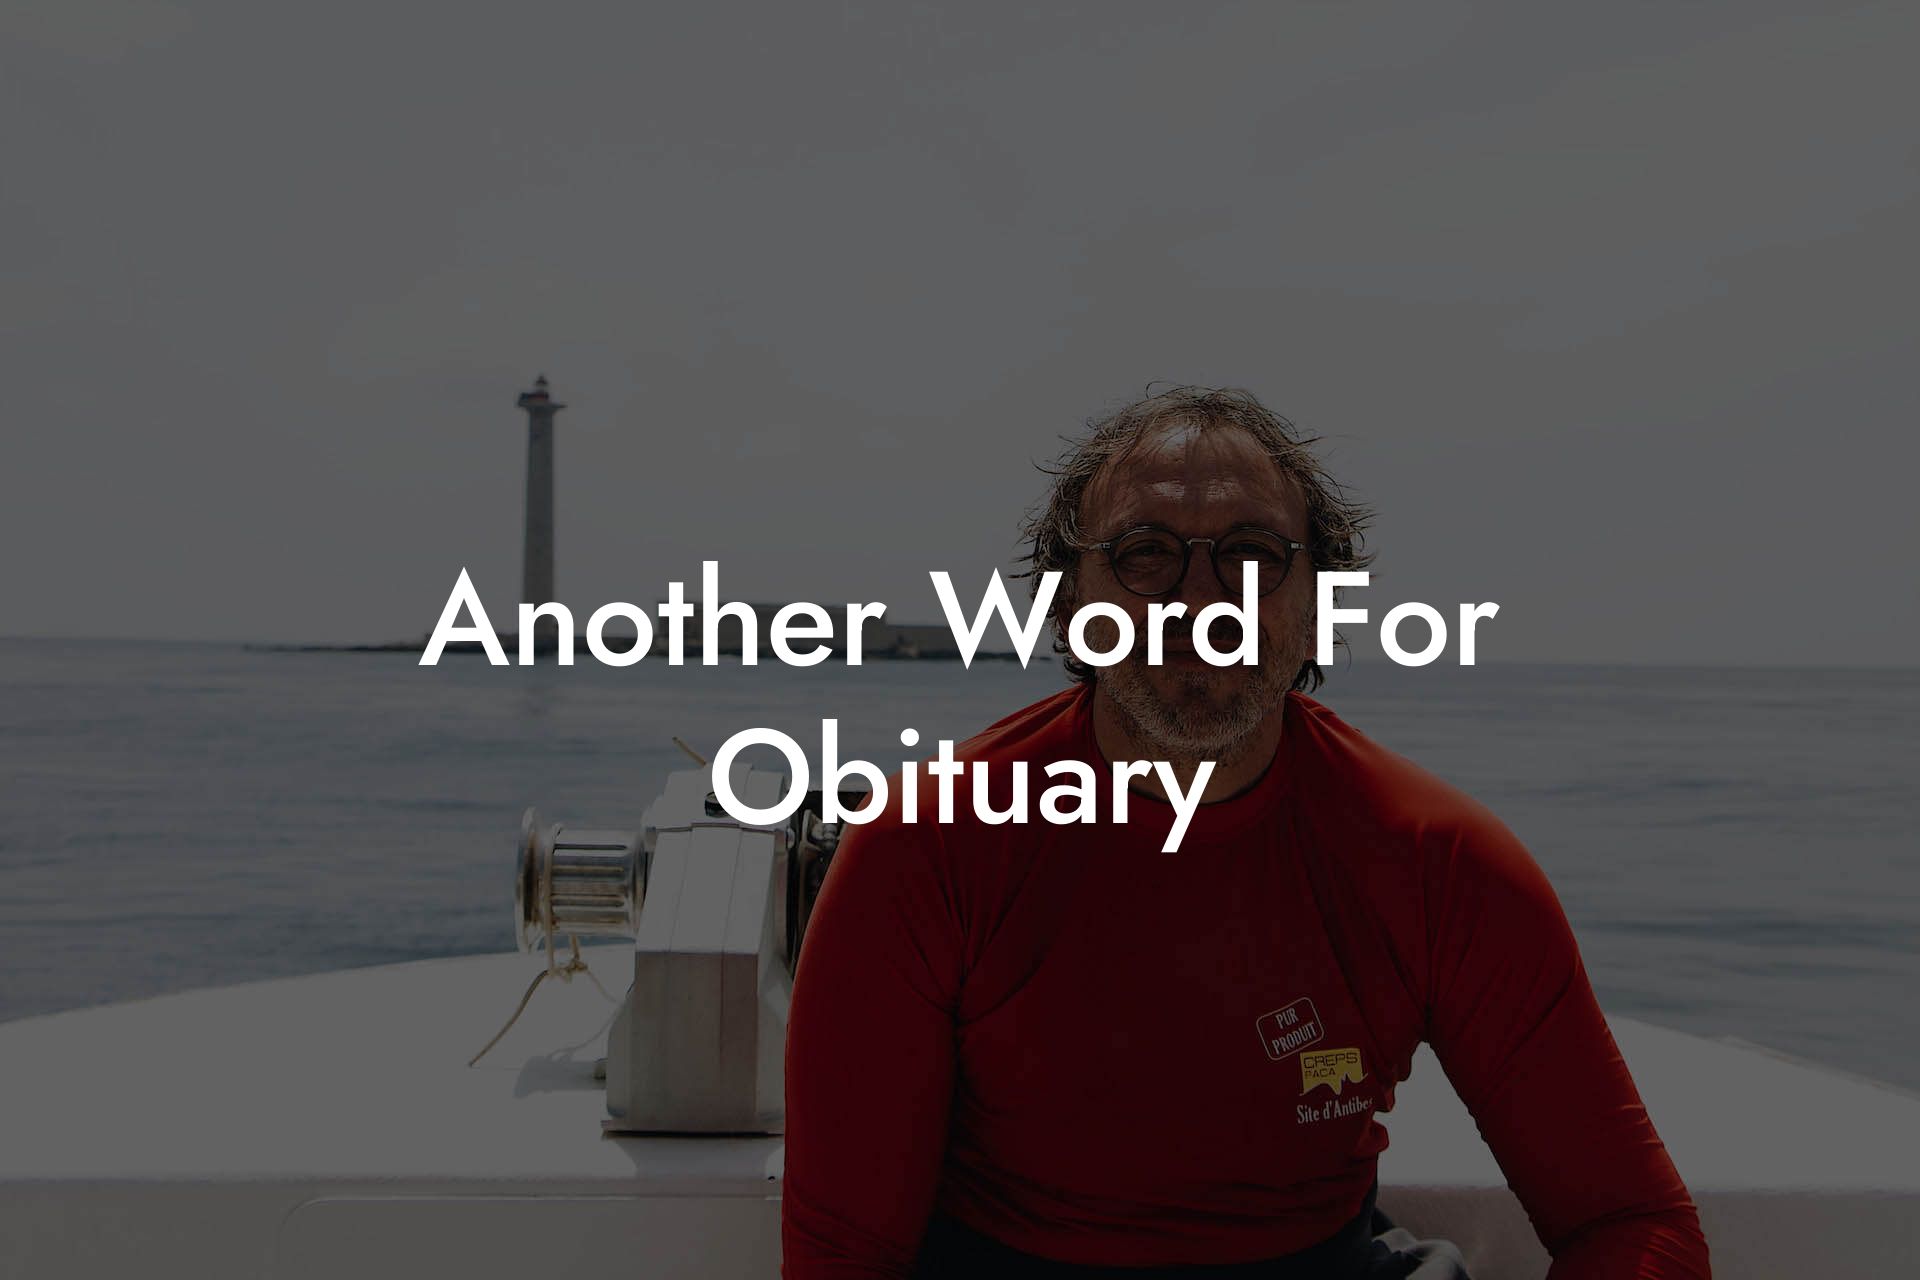 Another Word For Obituary